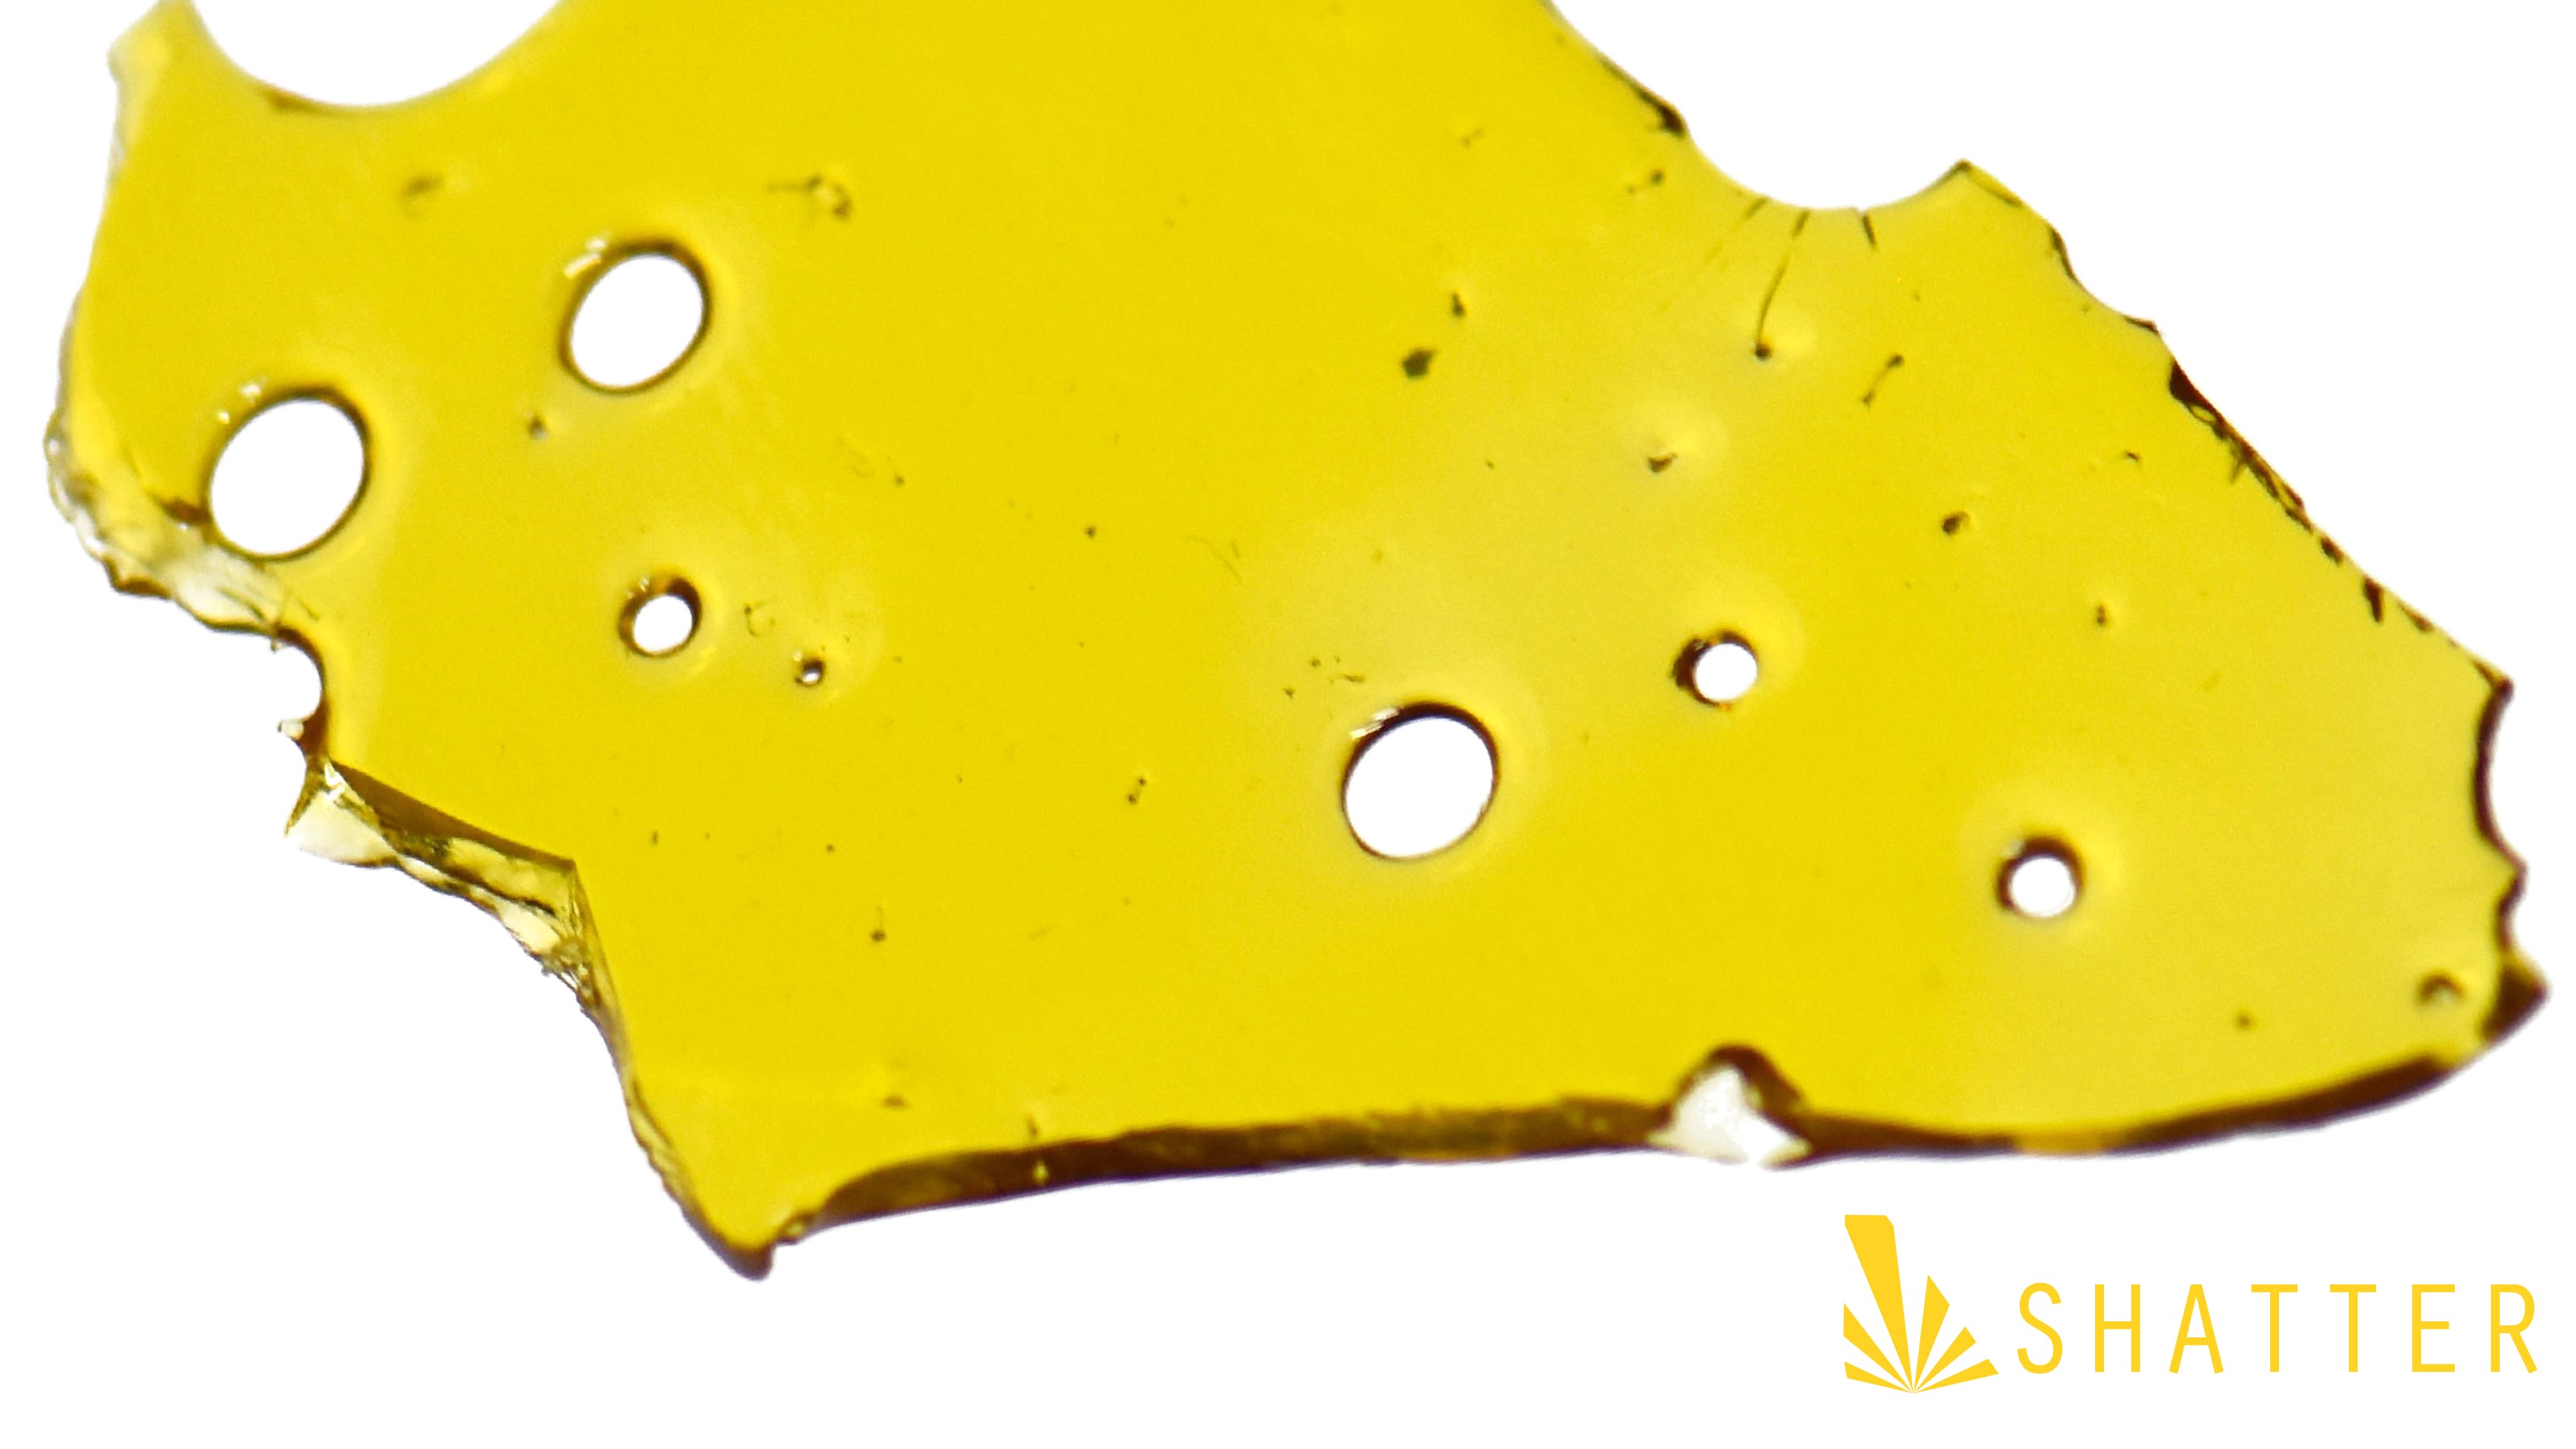 concentrate-shatter-durban-poison